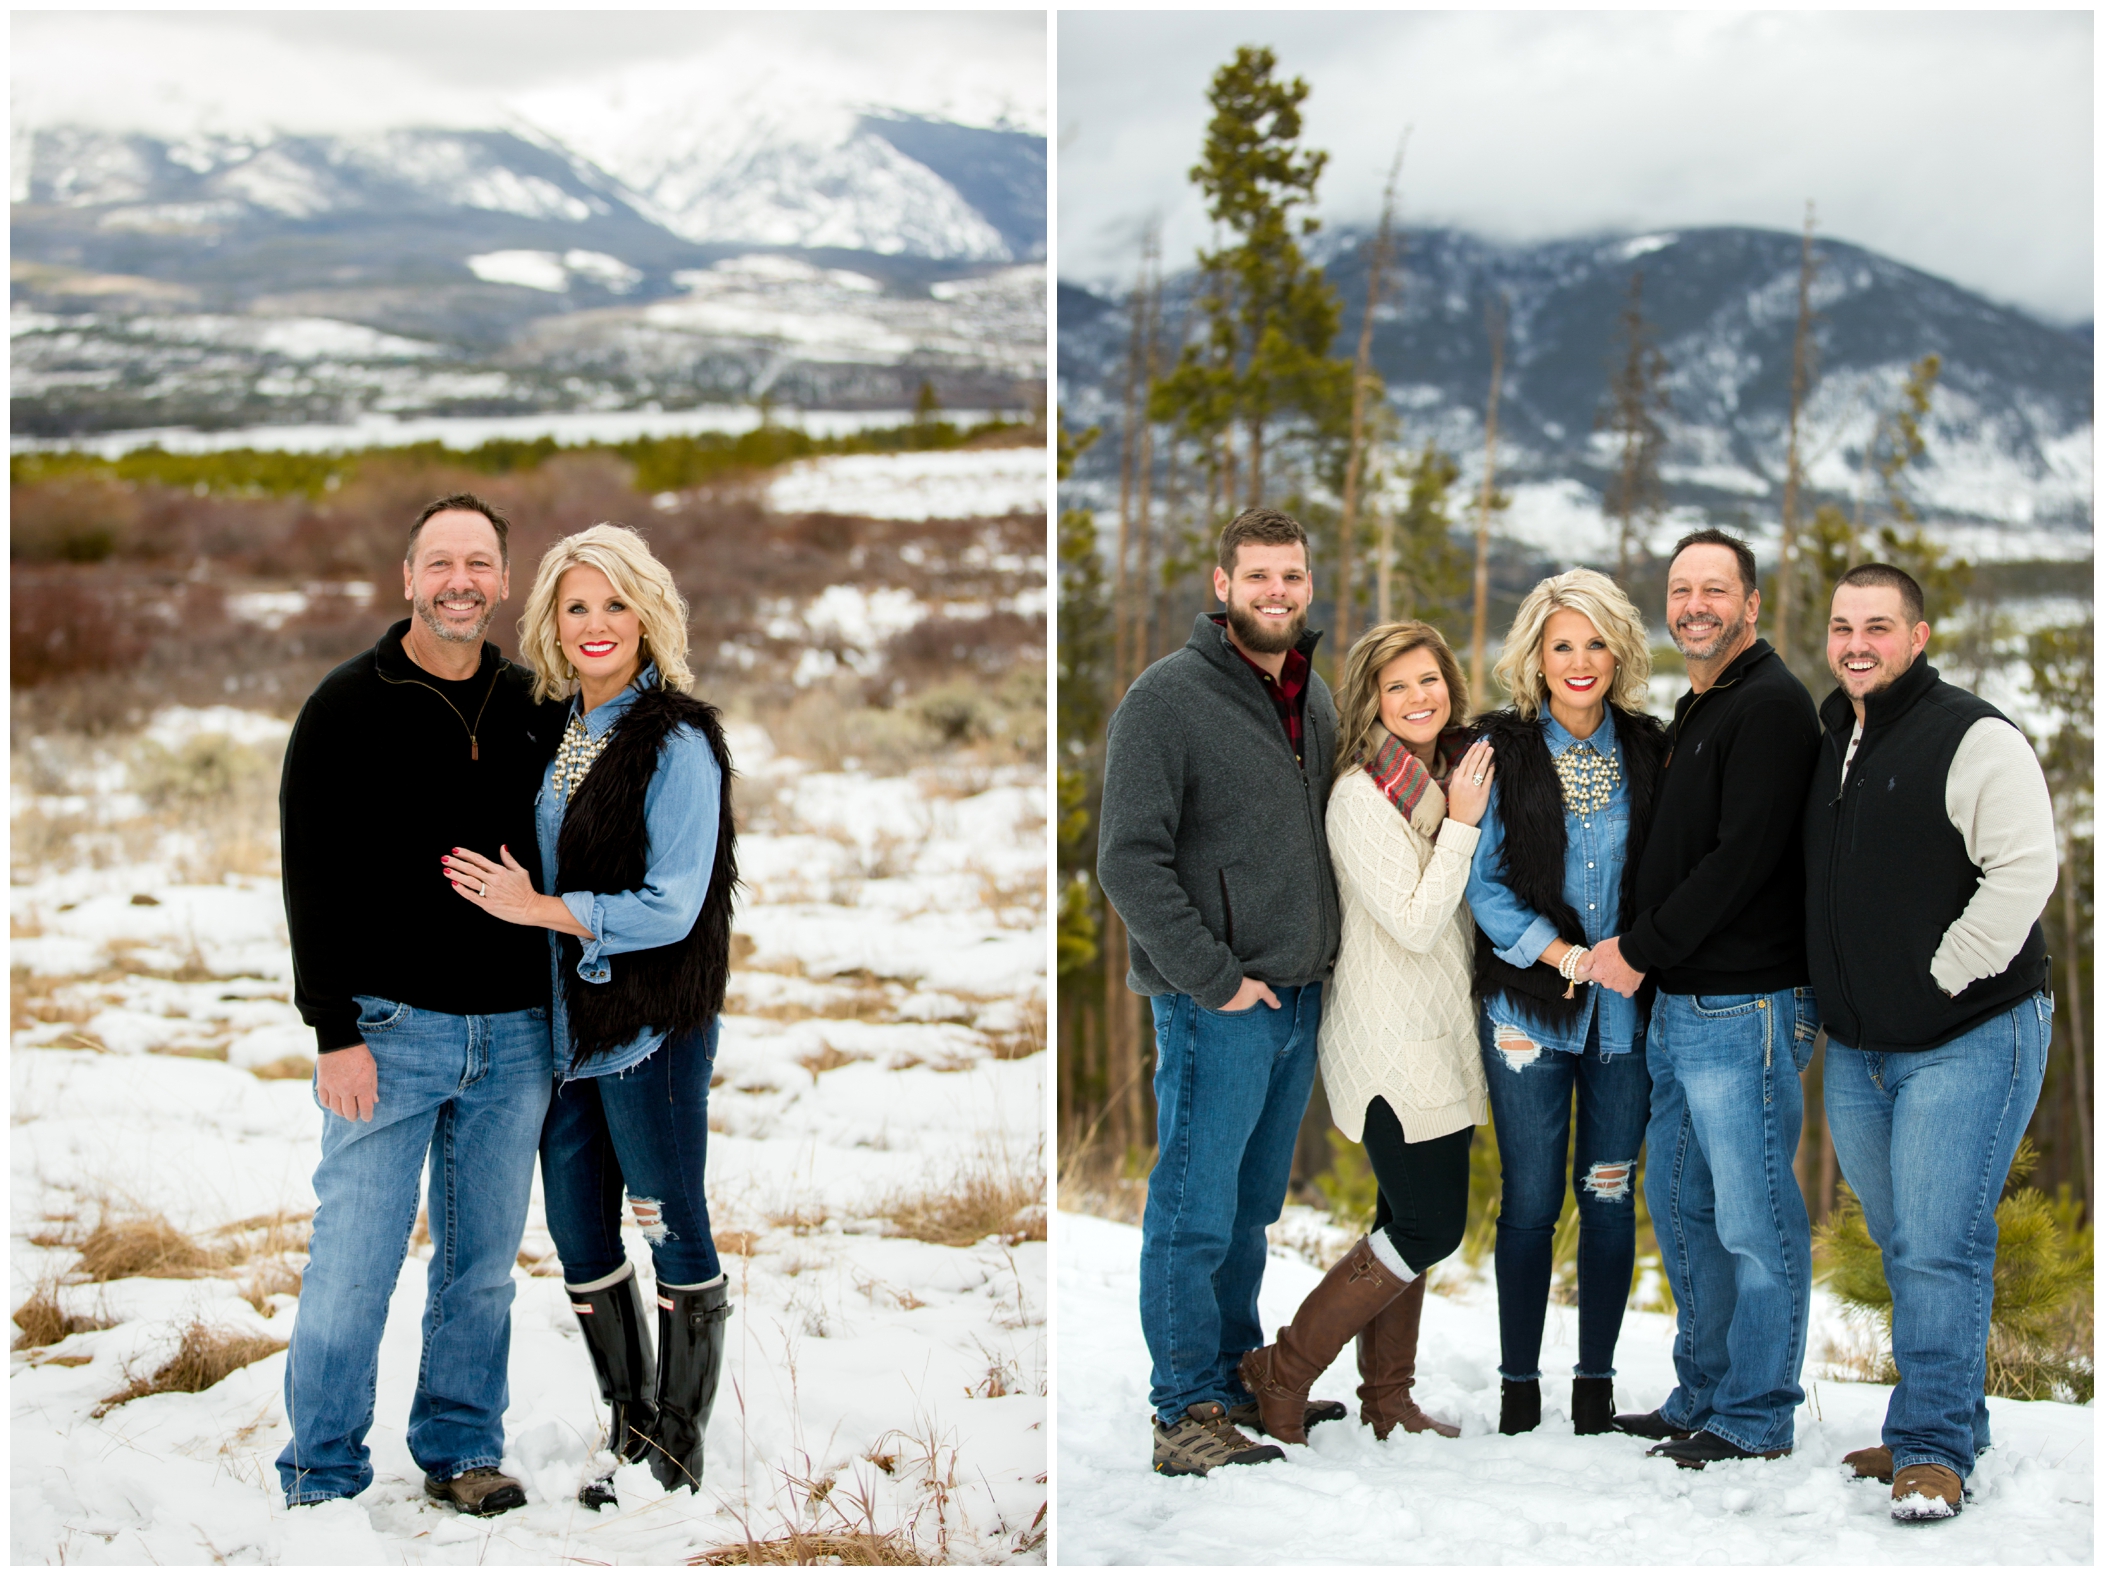 Breckenridge family photographs in winter with the snow covered mountains in the background